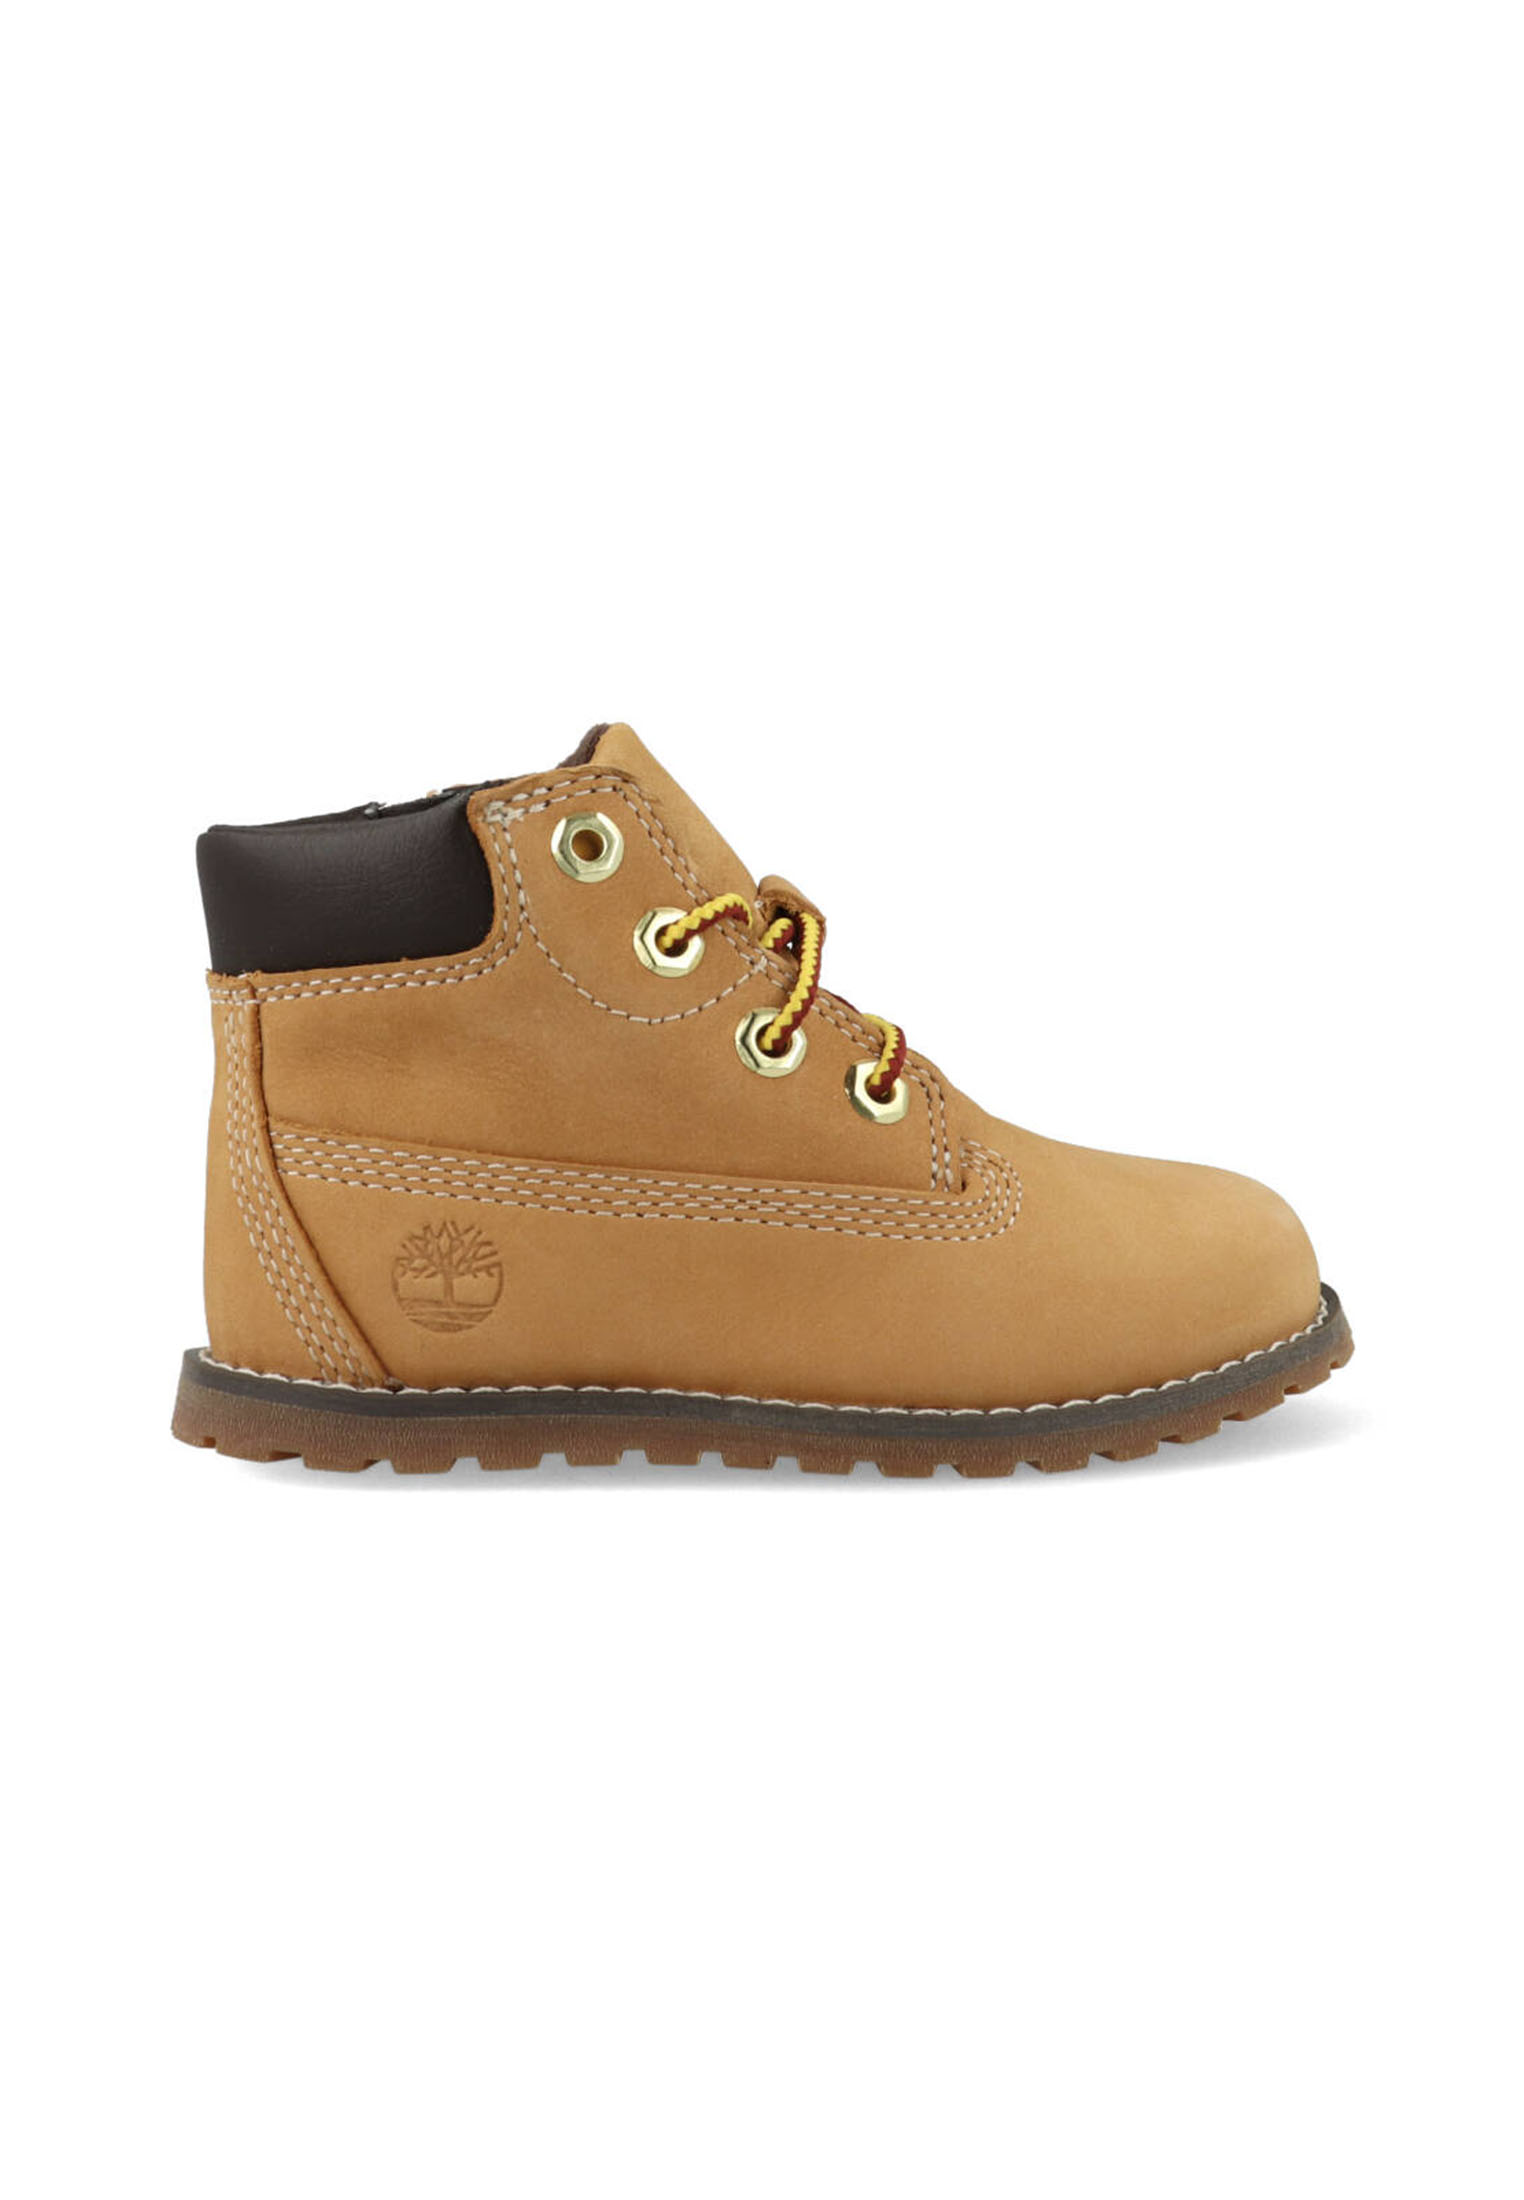 Timberland Pokey Pine 6-inch Boots A125Q Bruin-30 maat 30